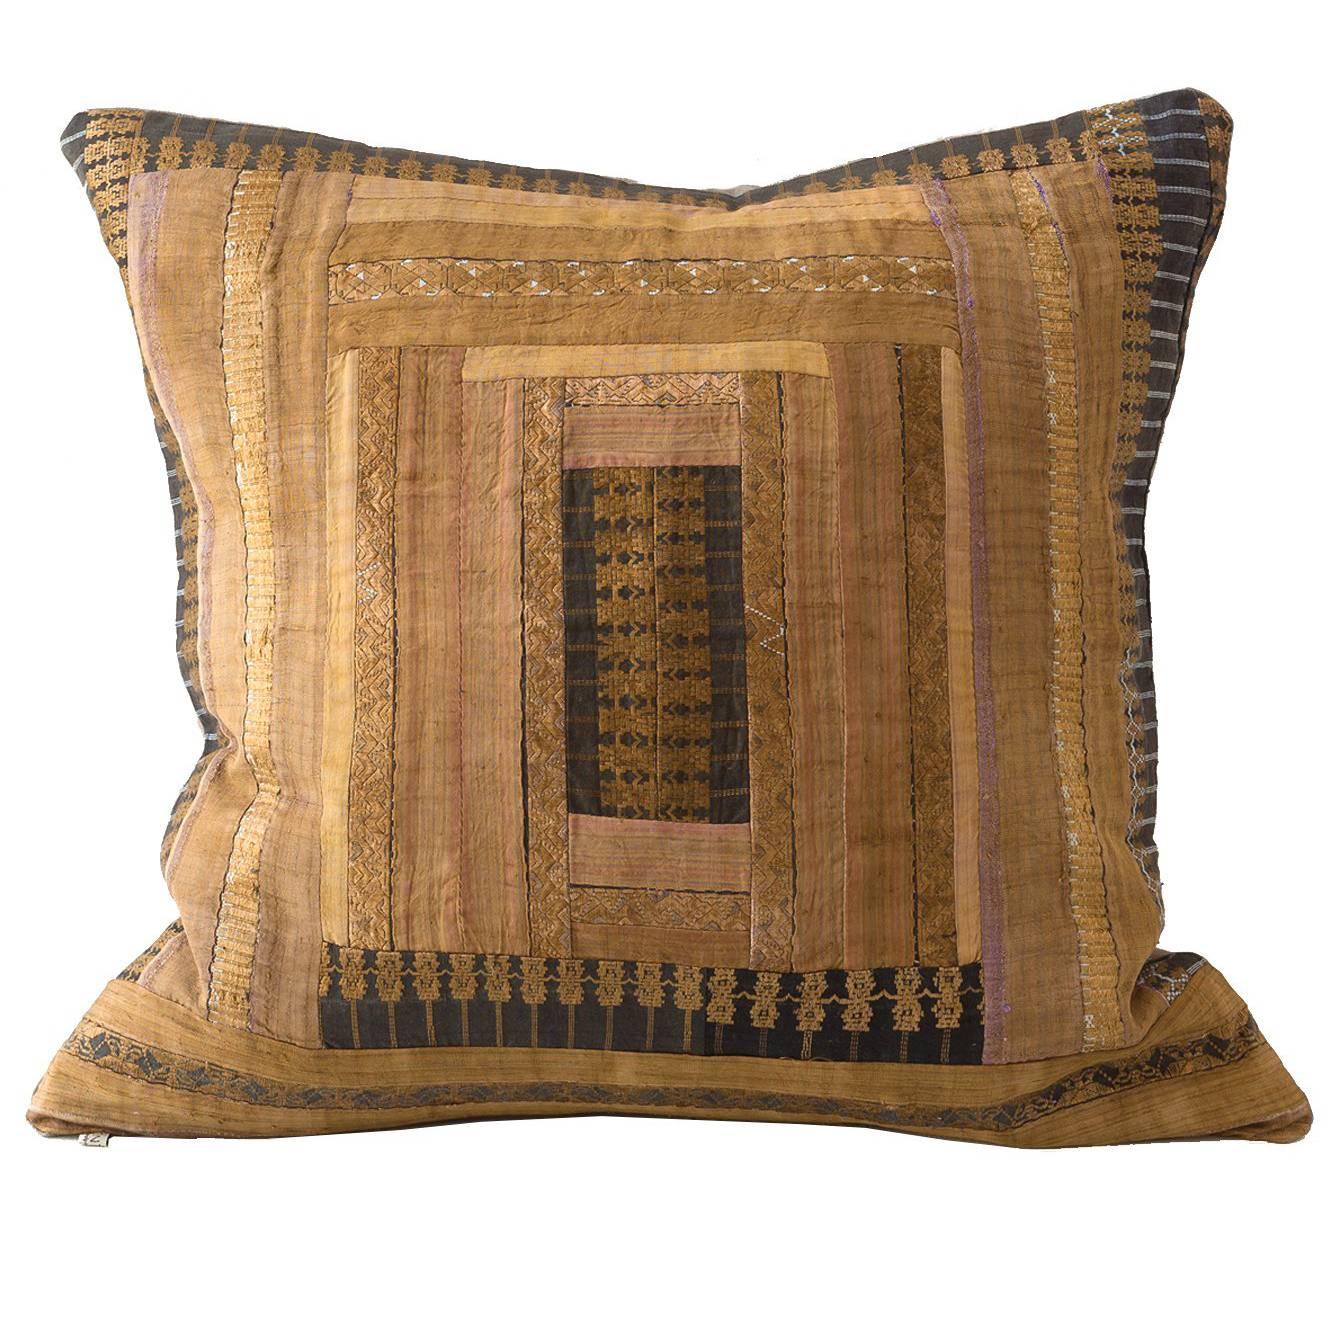 Huang Ping Miao Cushion- Bronze Silk Embroidered 